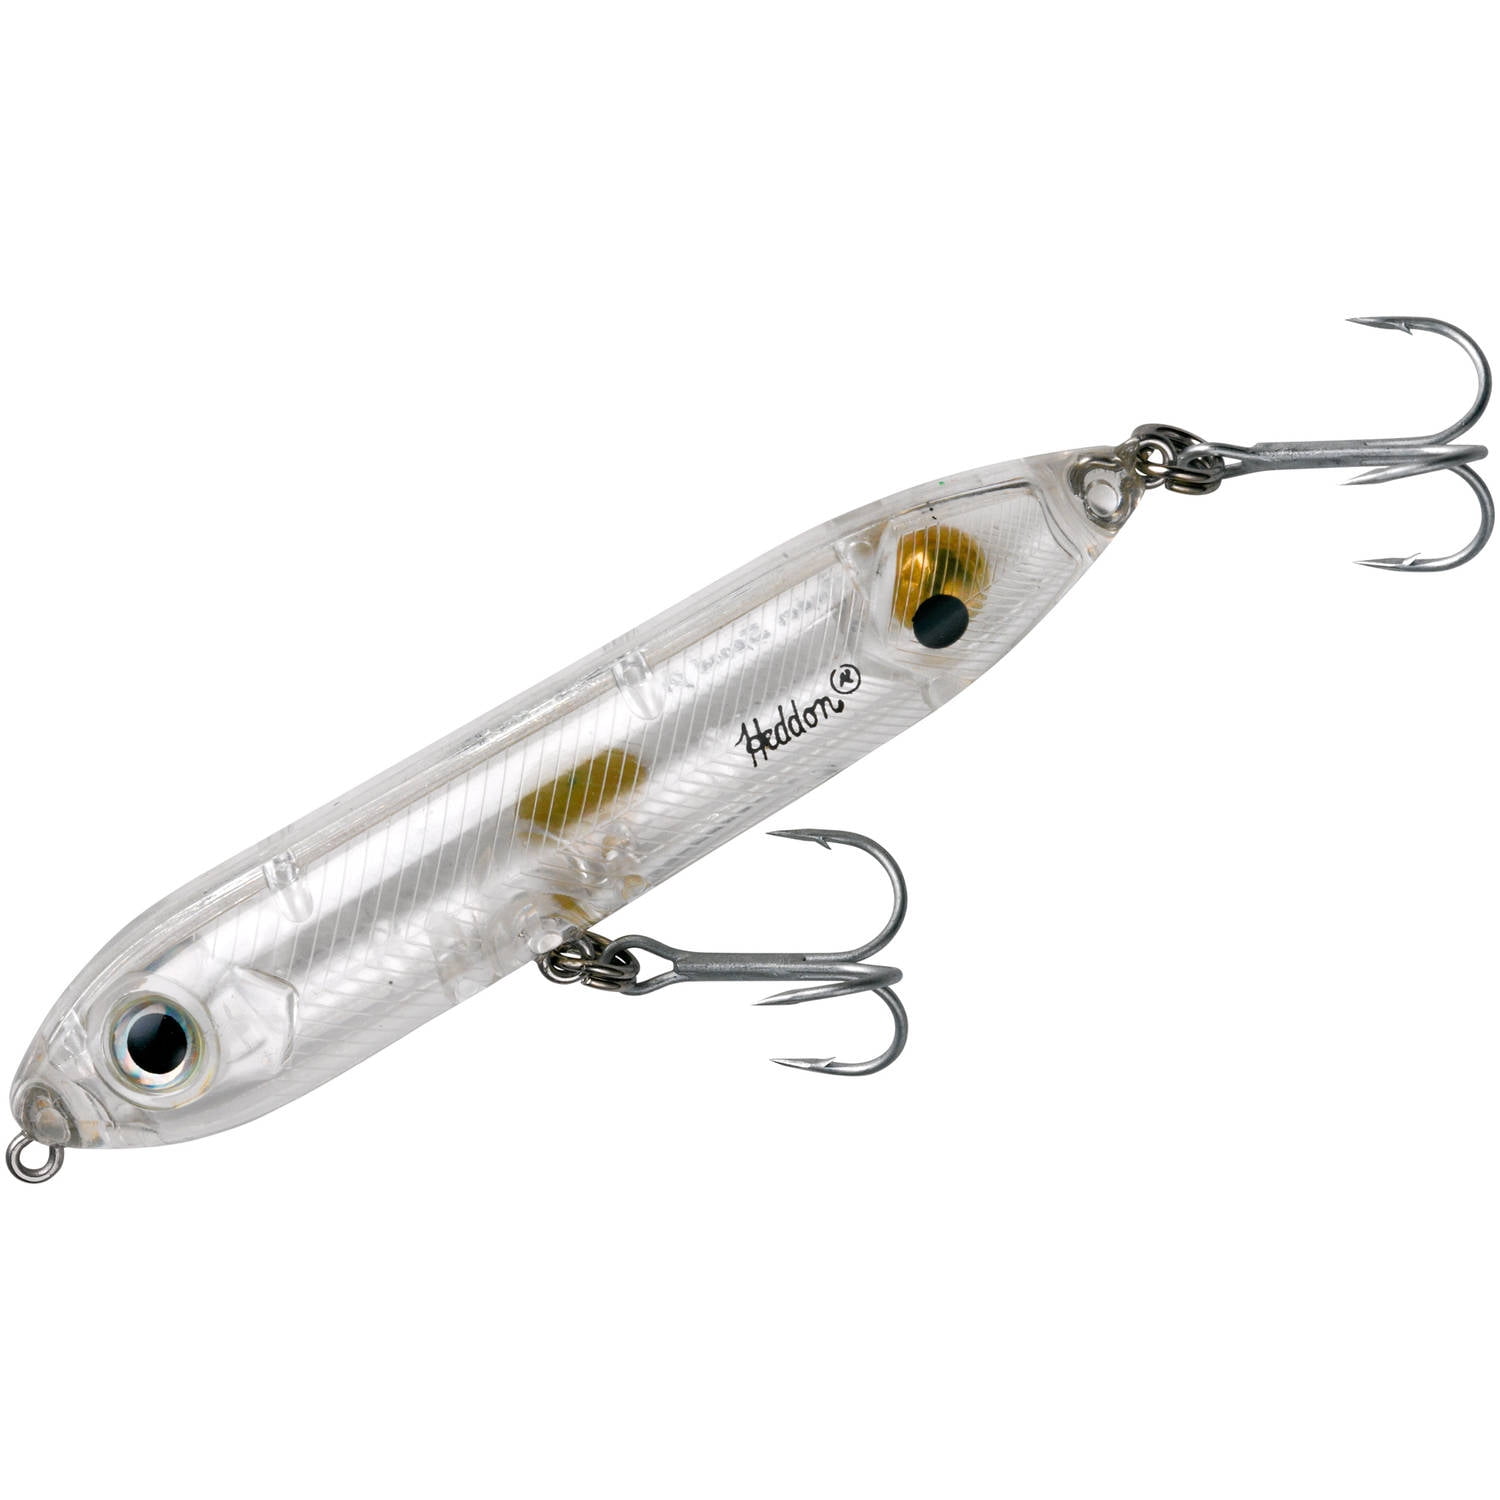 spook lure, spook lure Suppliers and Manufacturers at